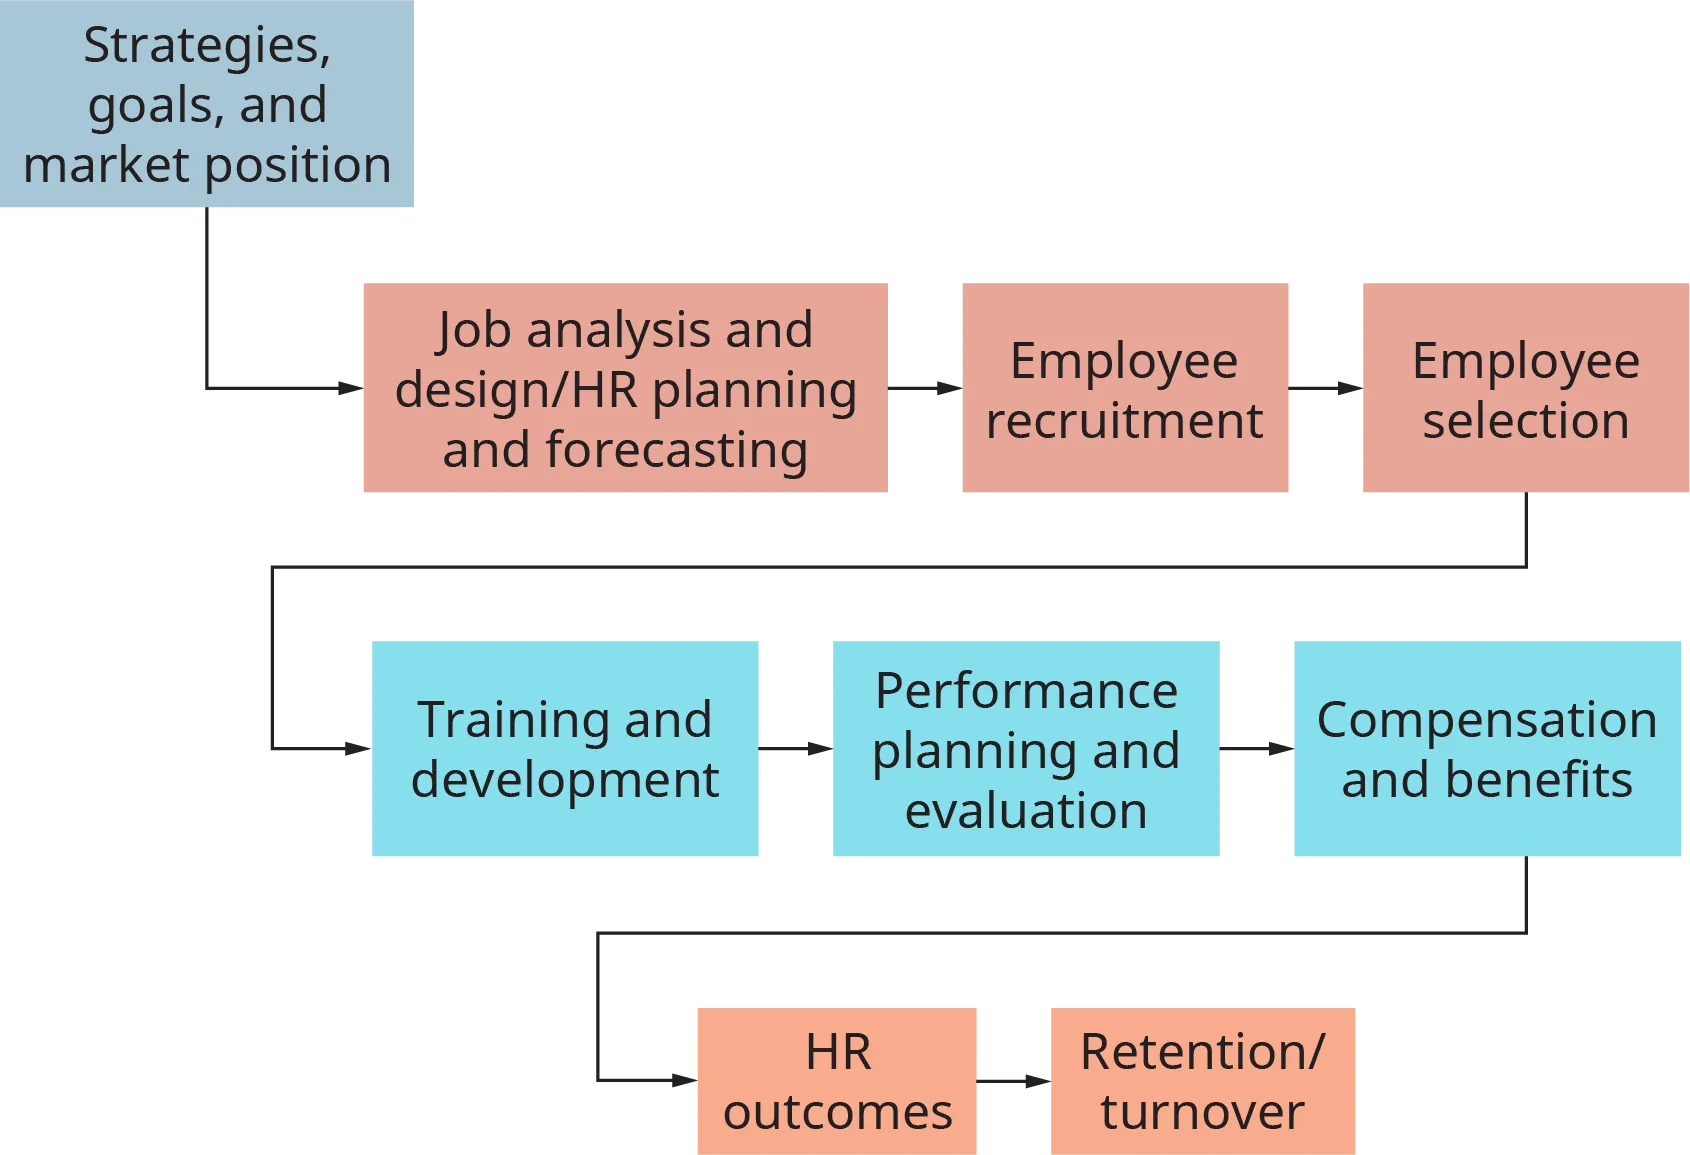 The chart starts with a box labeled strategies, goals, and market position. This flows into a box labeled job analysis and design slash h r planning and forecasting. This flows into employee recruitment. This flows into employee selection. This flows into training and development. This flows into performance planning and evaluation. This flows into compensation and benefits. This flows into h r outcomes. This flows into retention slash turnover, which is the last box.